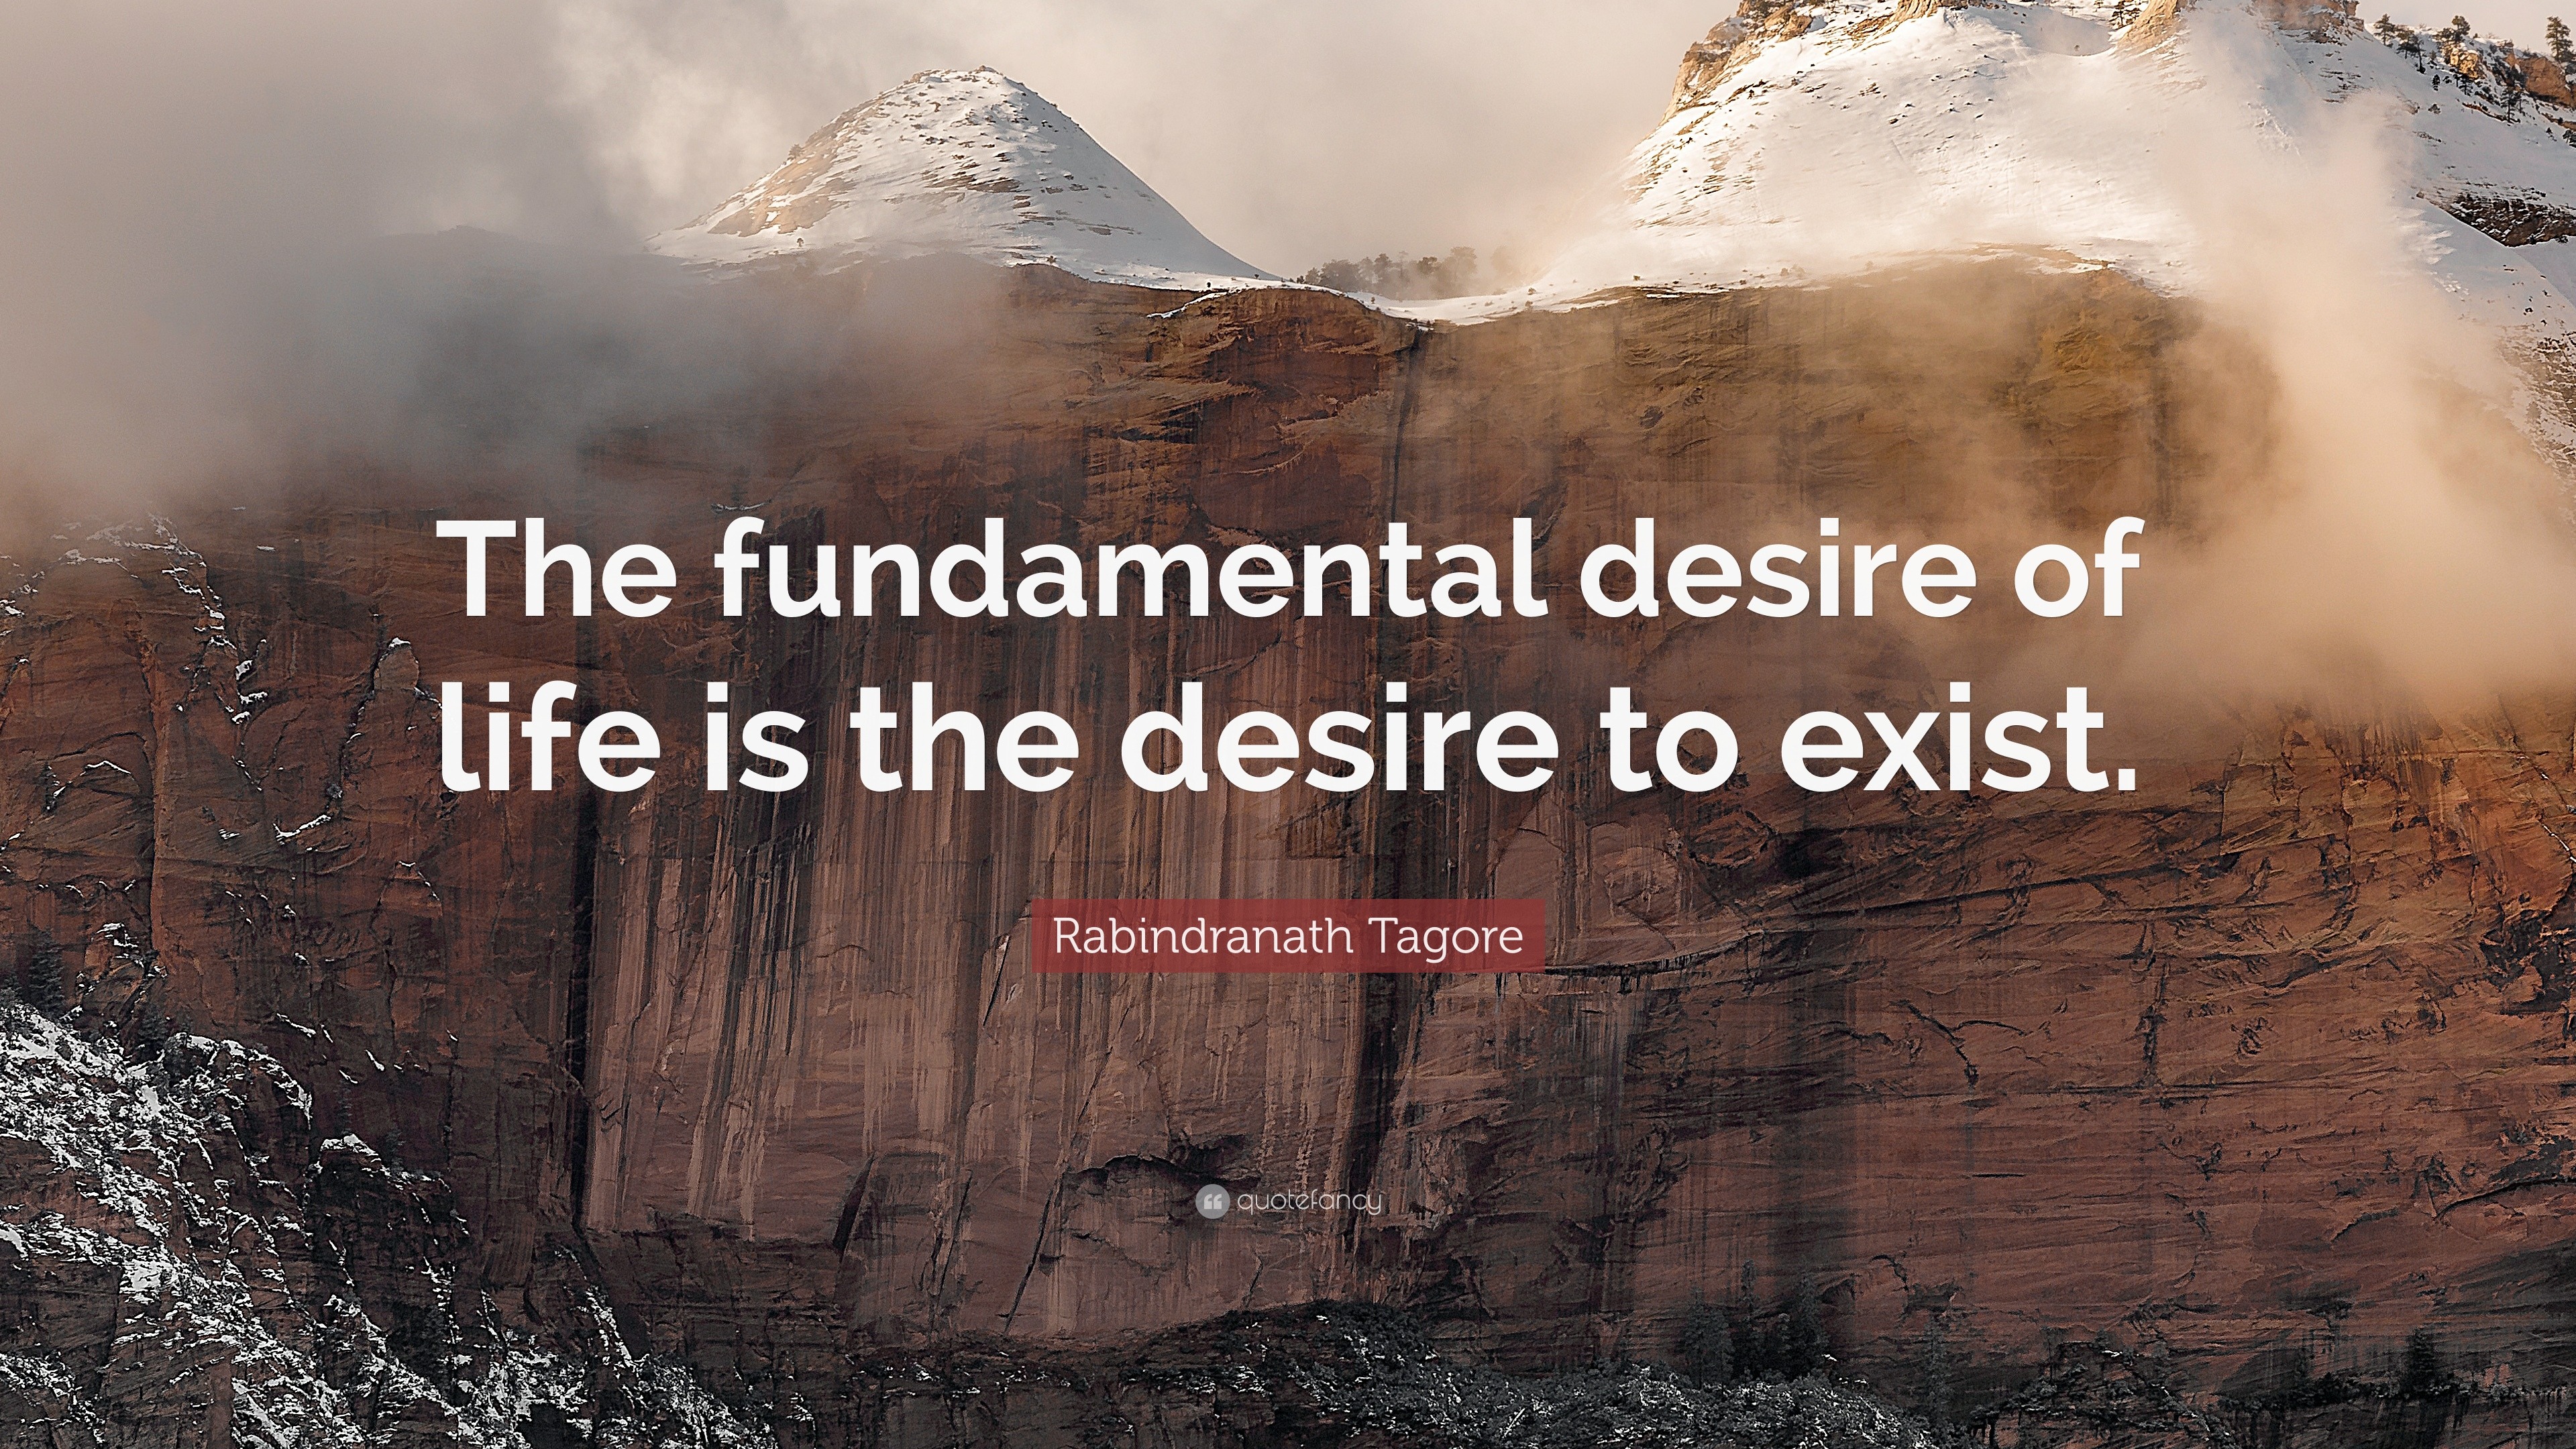 Rabindranath Tagore Quote: “The fundamental of life is the desire to exist.”